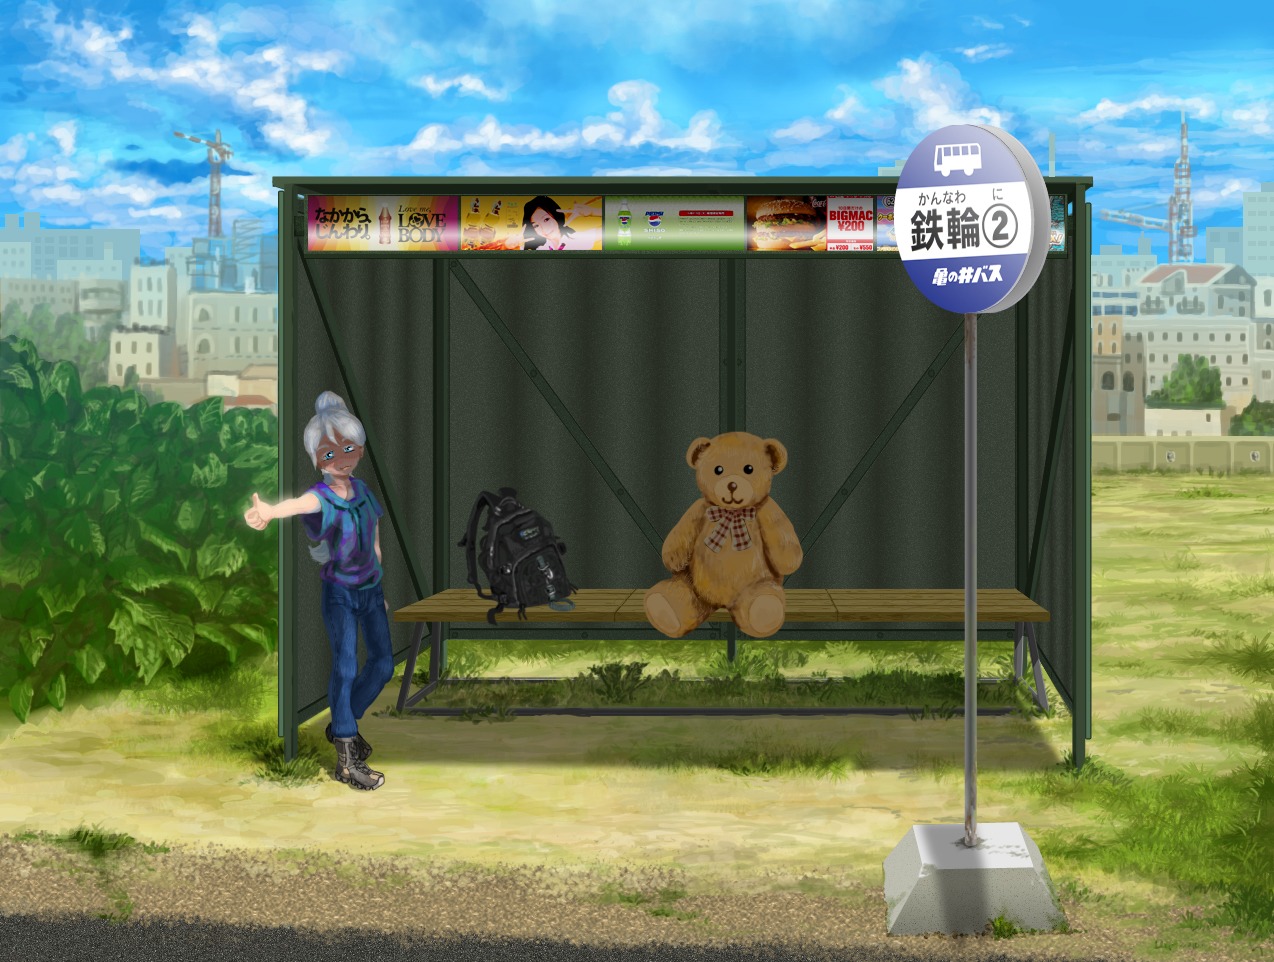 alice alice_quest backpack bag blue_eyes bus_stop city denim grey_hair outdoors ponytail shirt sign sky summer thumbs_up toy t-shirt white_hair